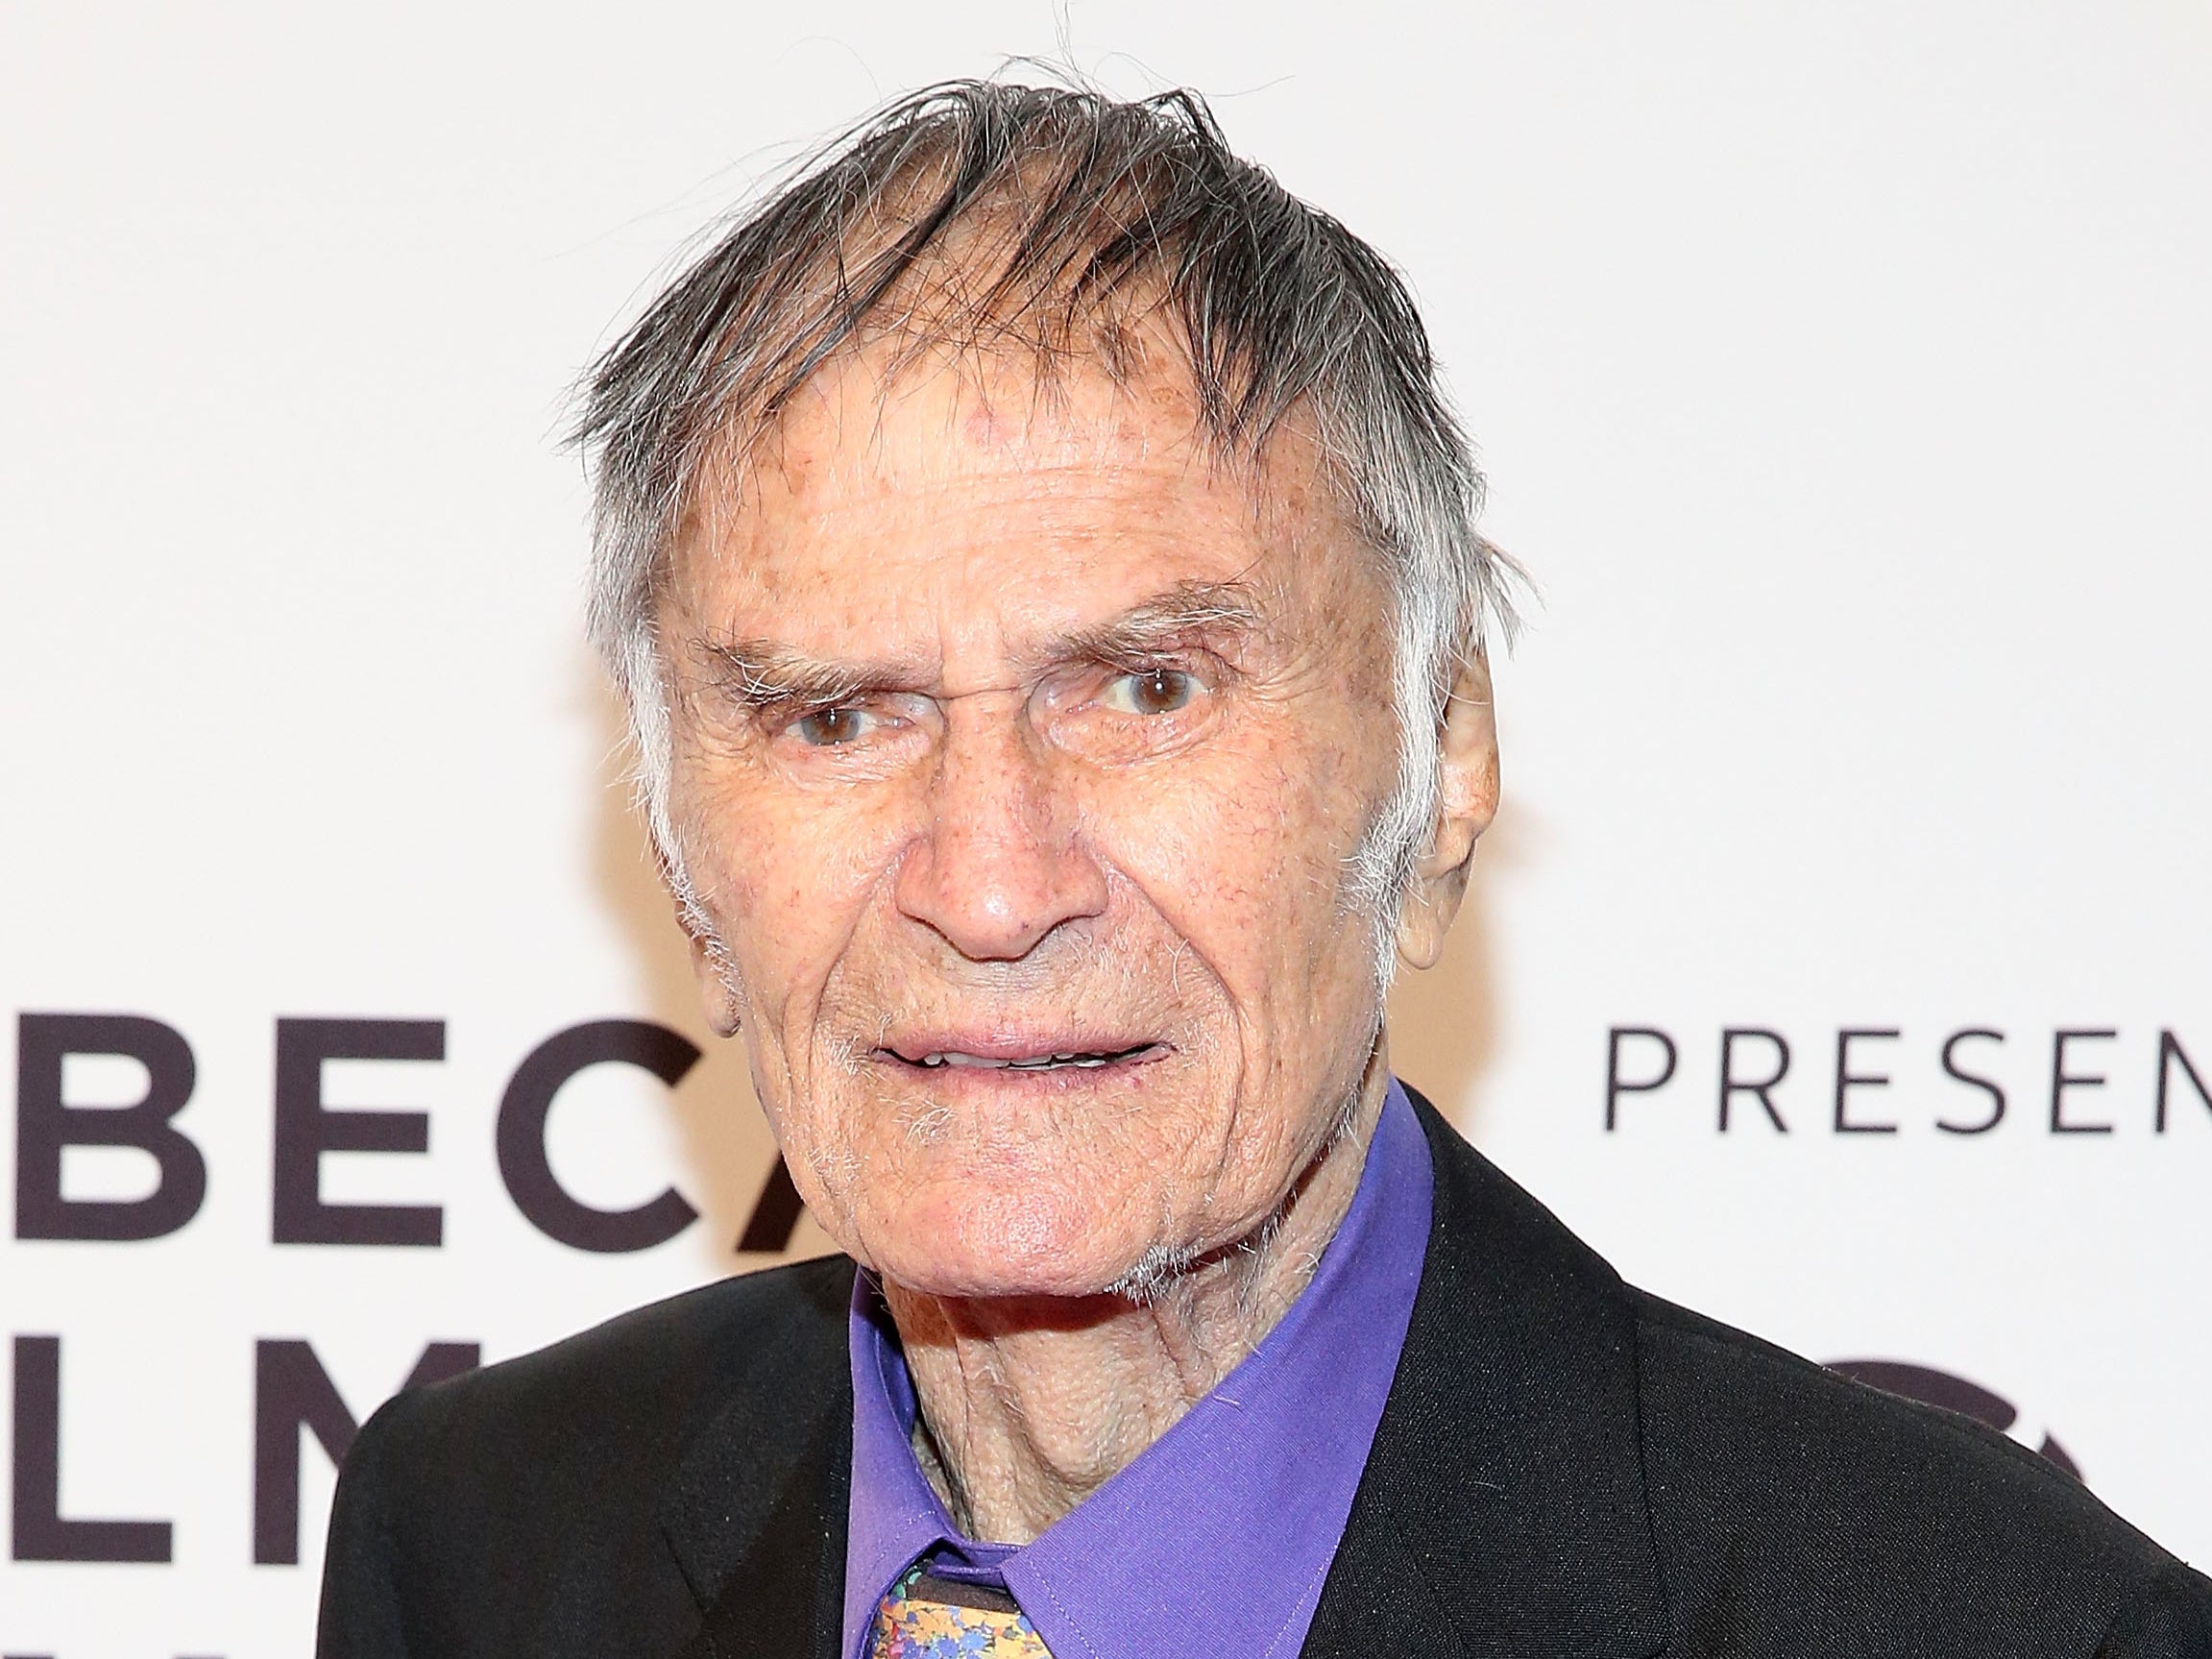 Actor Larry Storch photographed at the premiere of ‘Gilbert’ in 2017